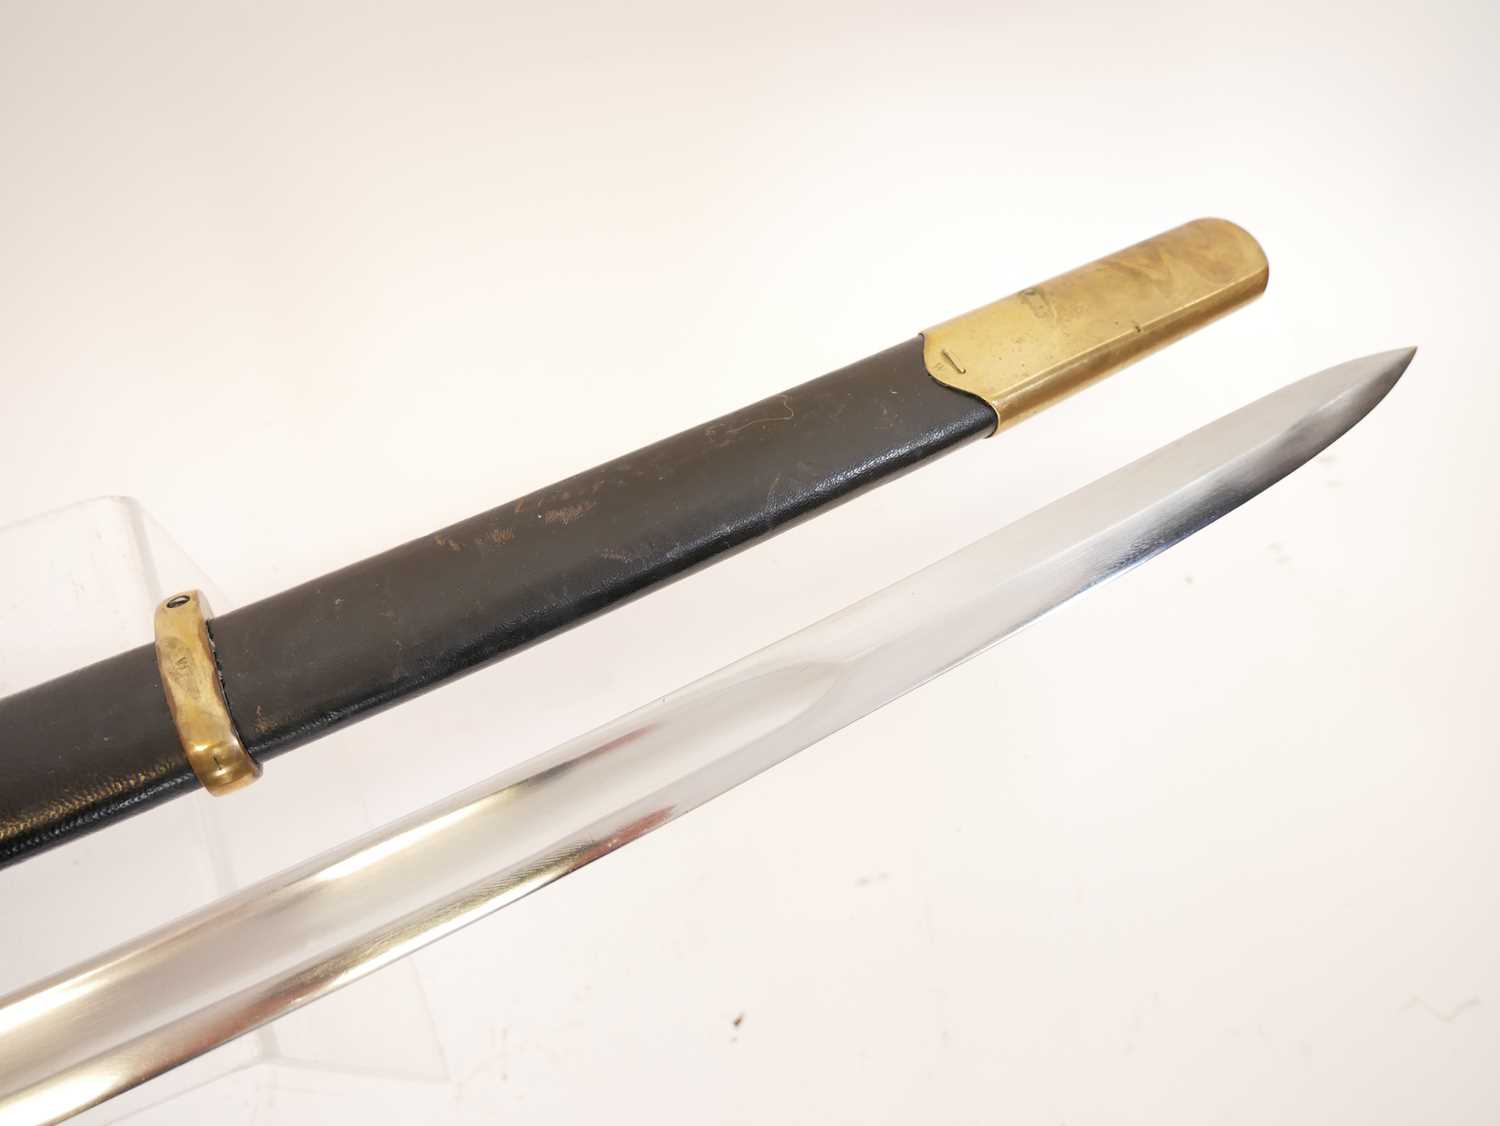 Reproduction copy of a Russian Cossak Shaska sword and scabbard. Buyer must be over the age of 18. - Image 7 of 9